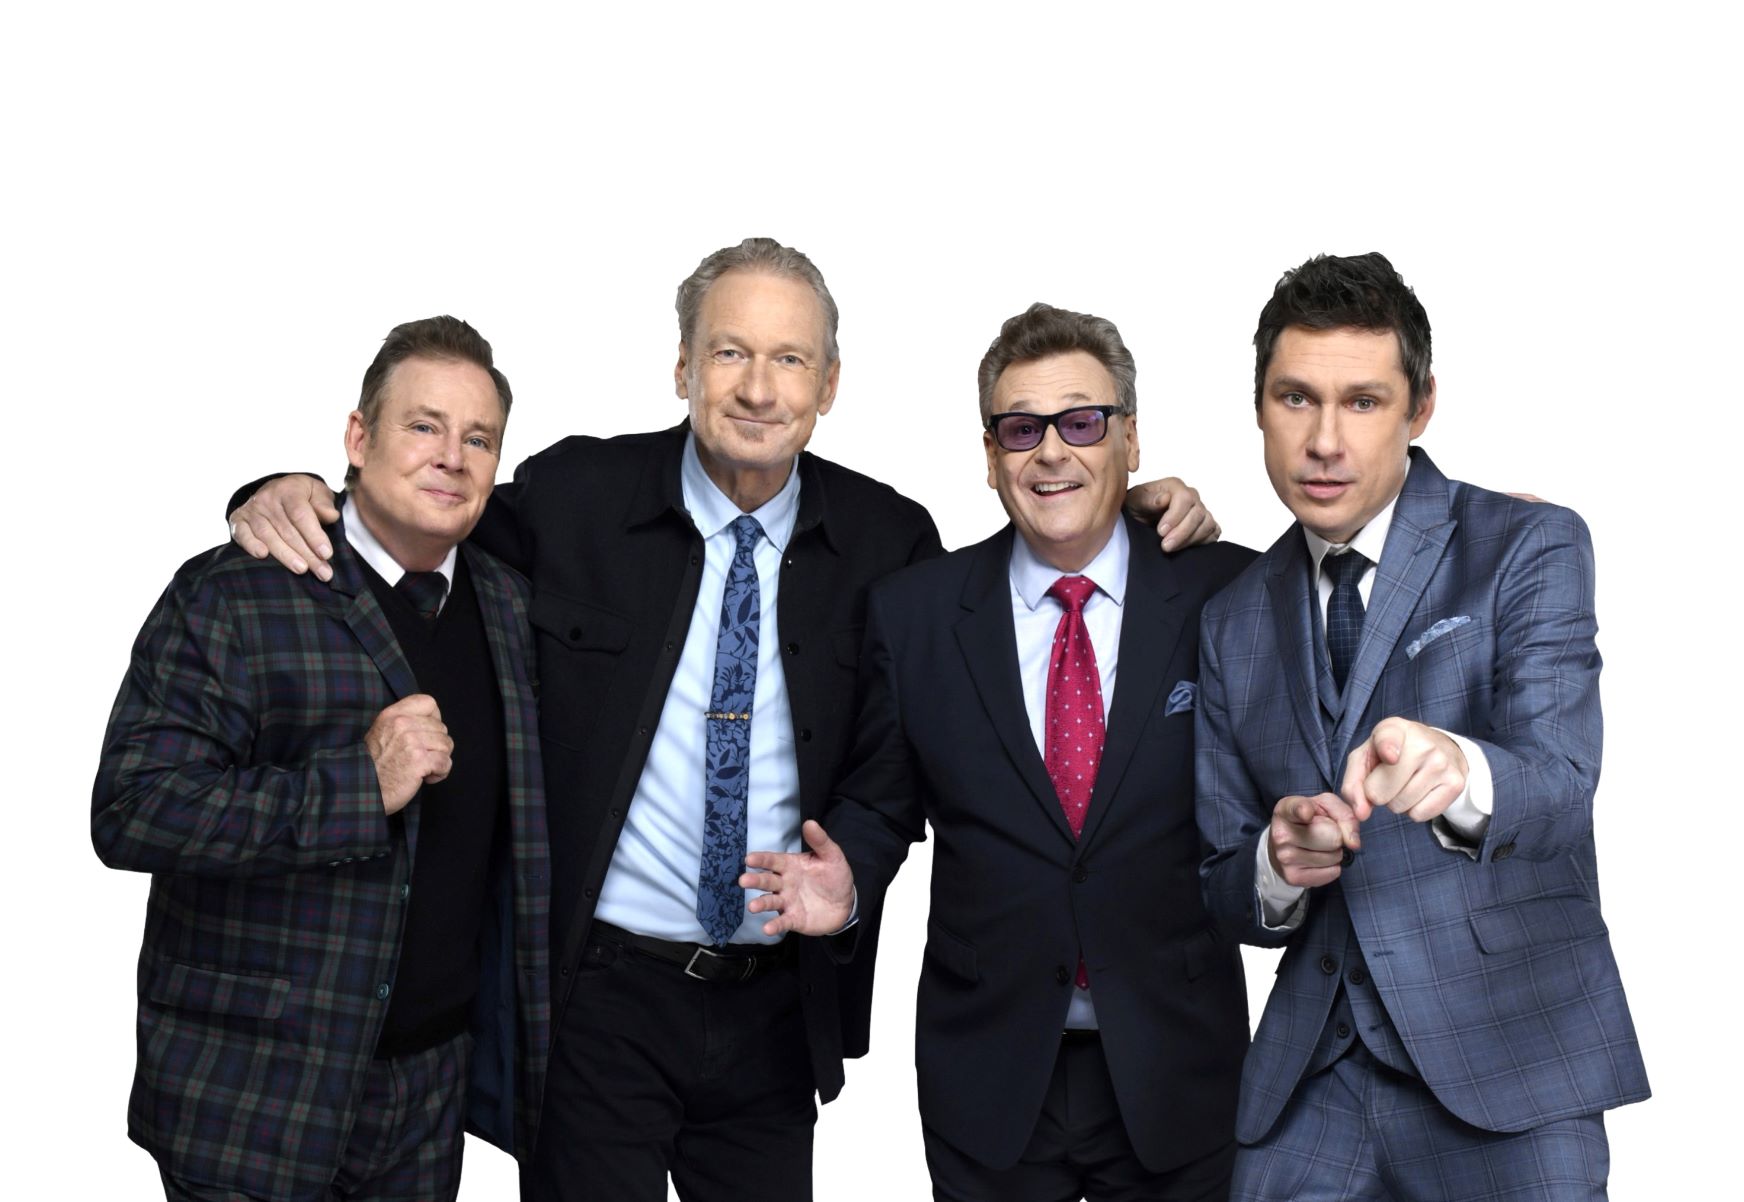 whose line is it anyway 2022